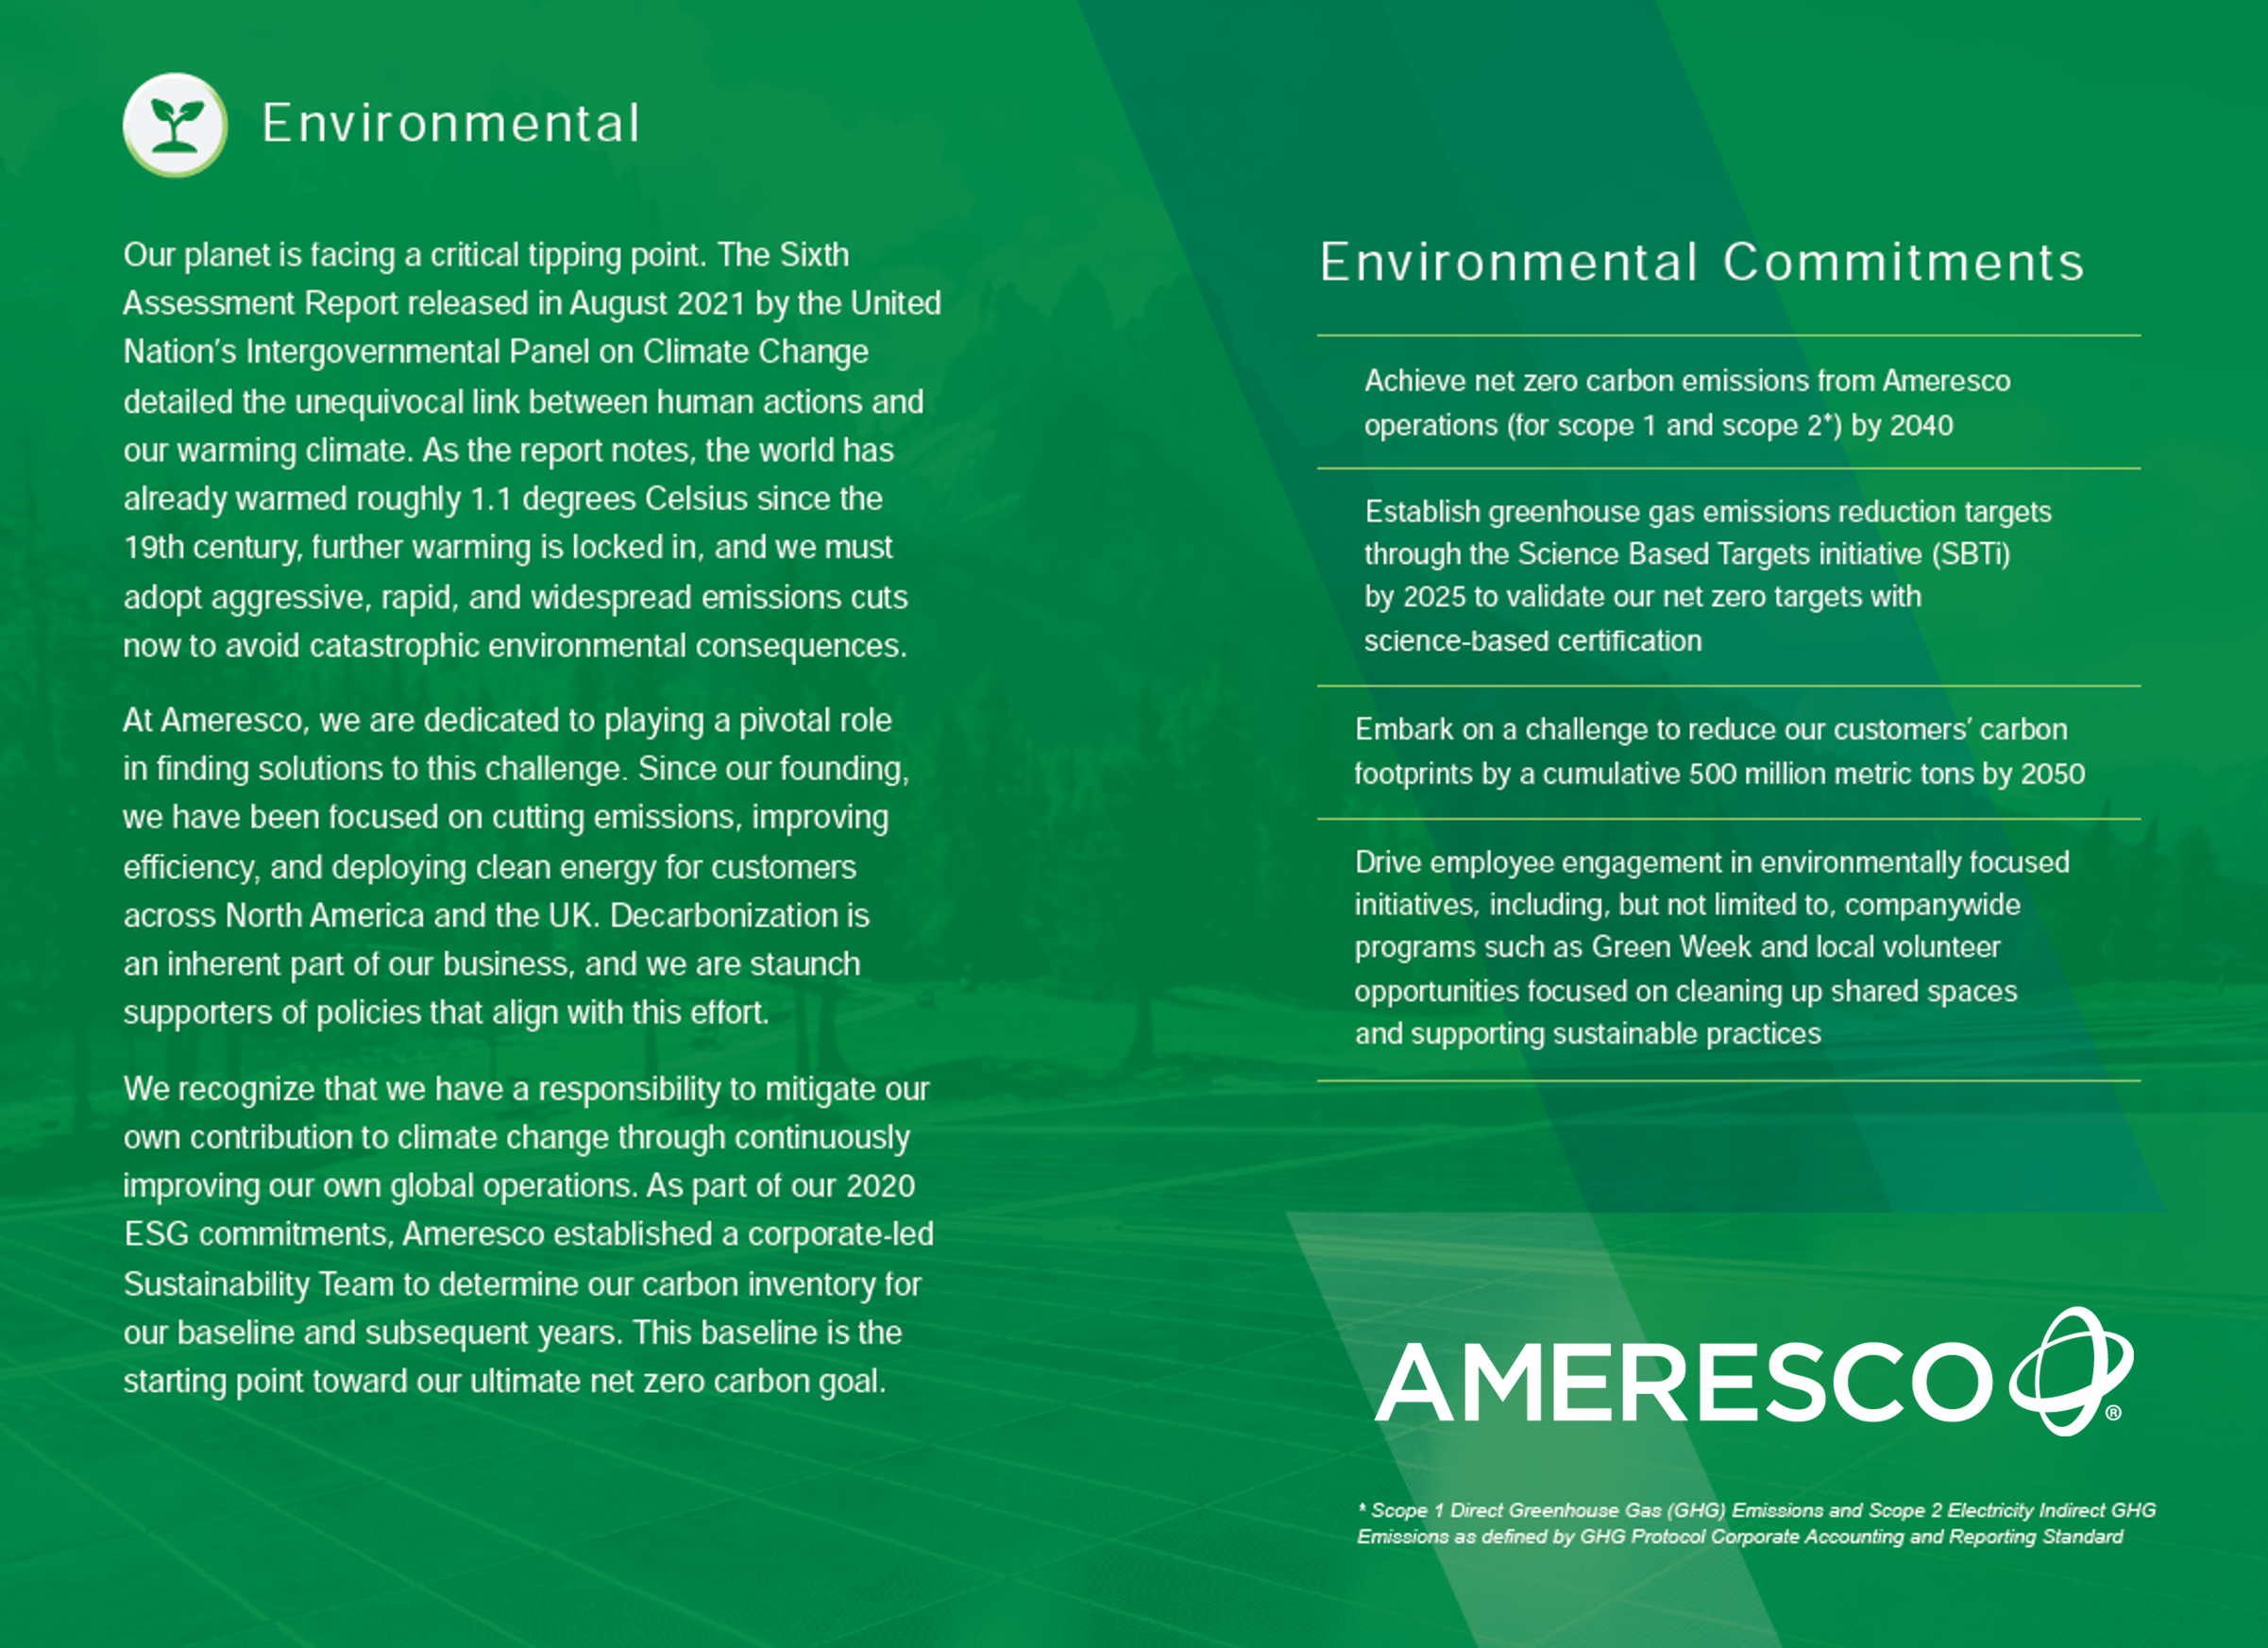 Reproduction of the Environmental page in the Ameresco 2021 ESG Report